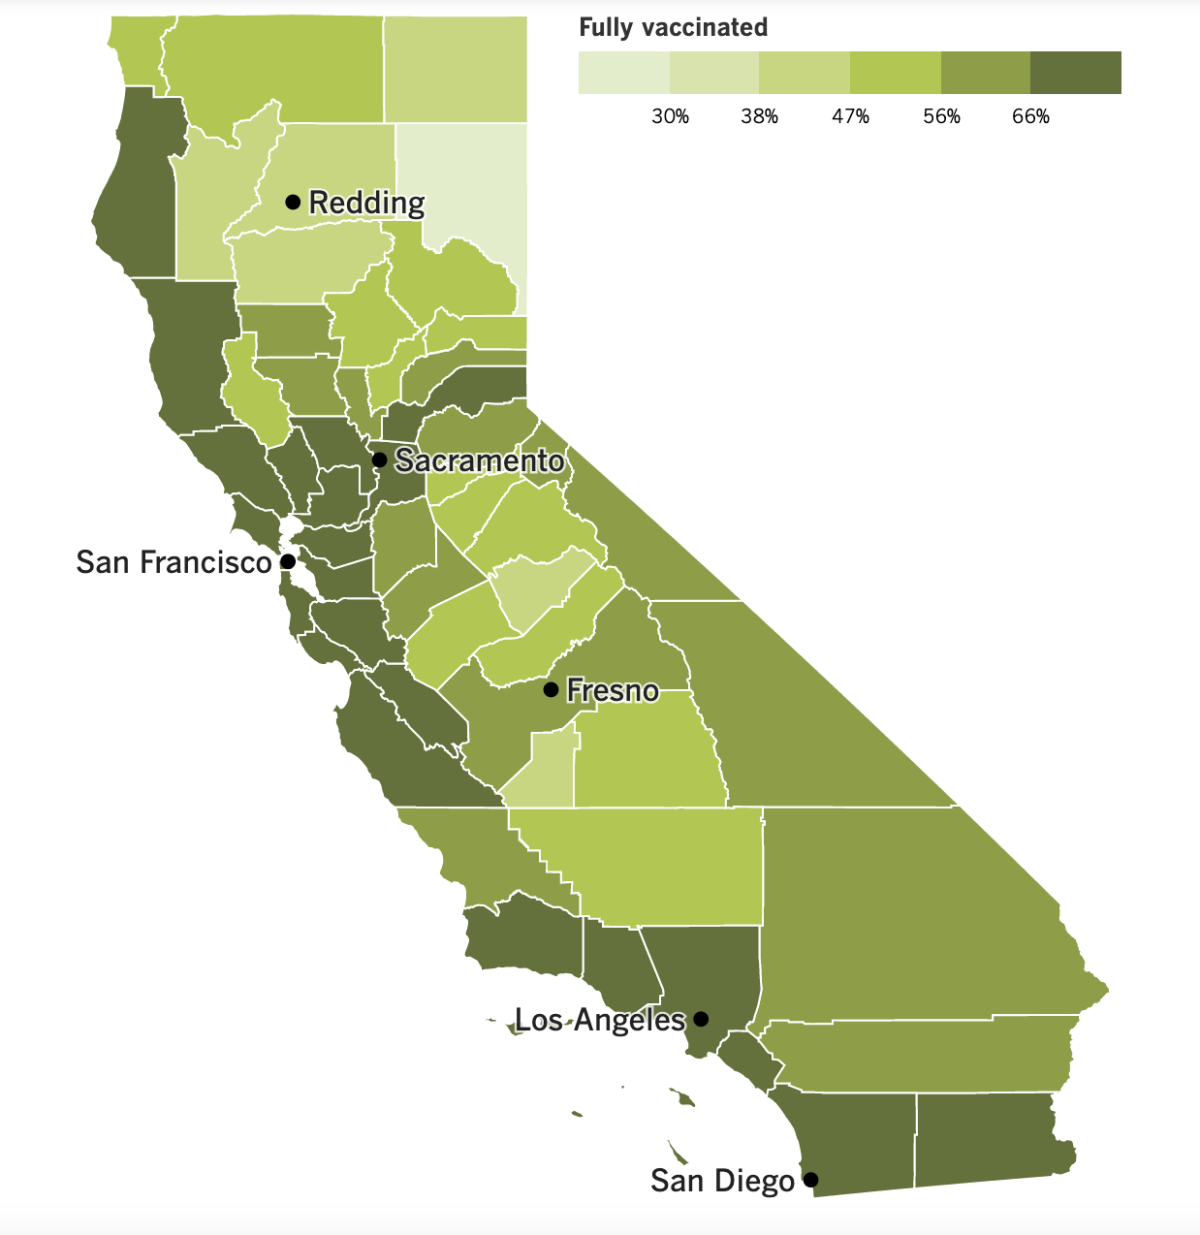 A map showing California's COVID-19 vaccination progress by county as of May 17, 2022.